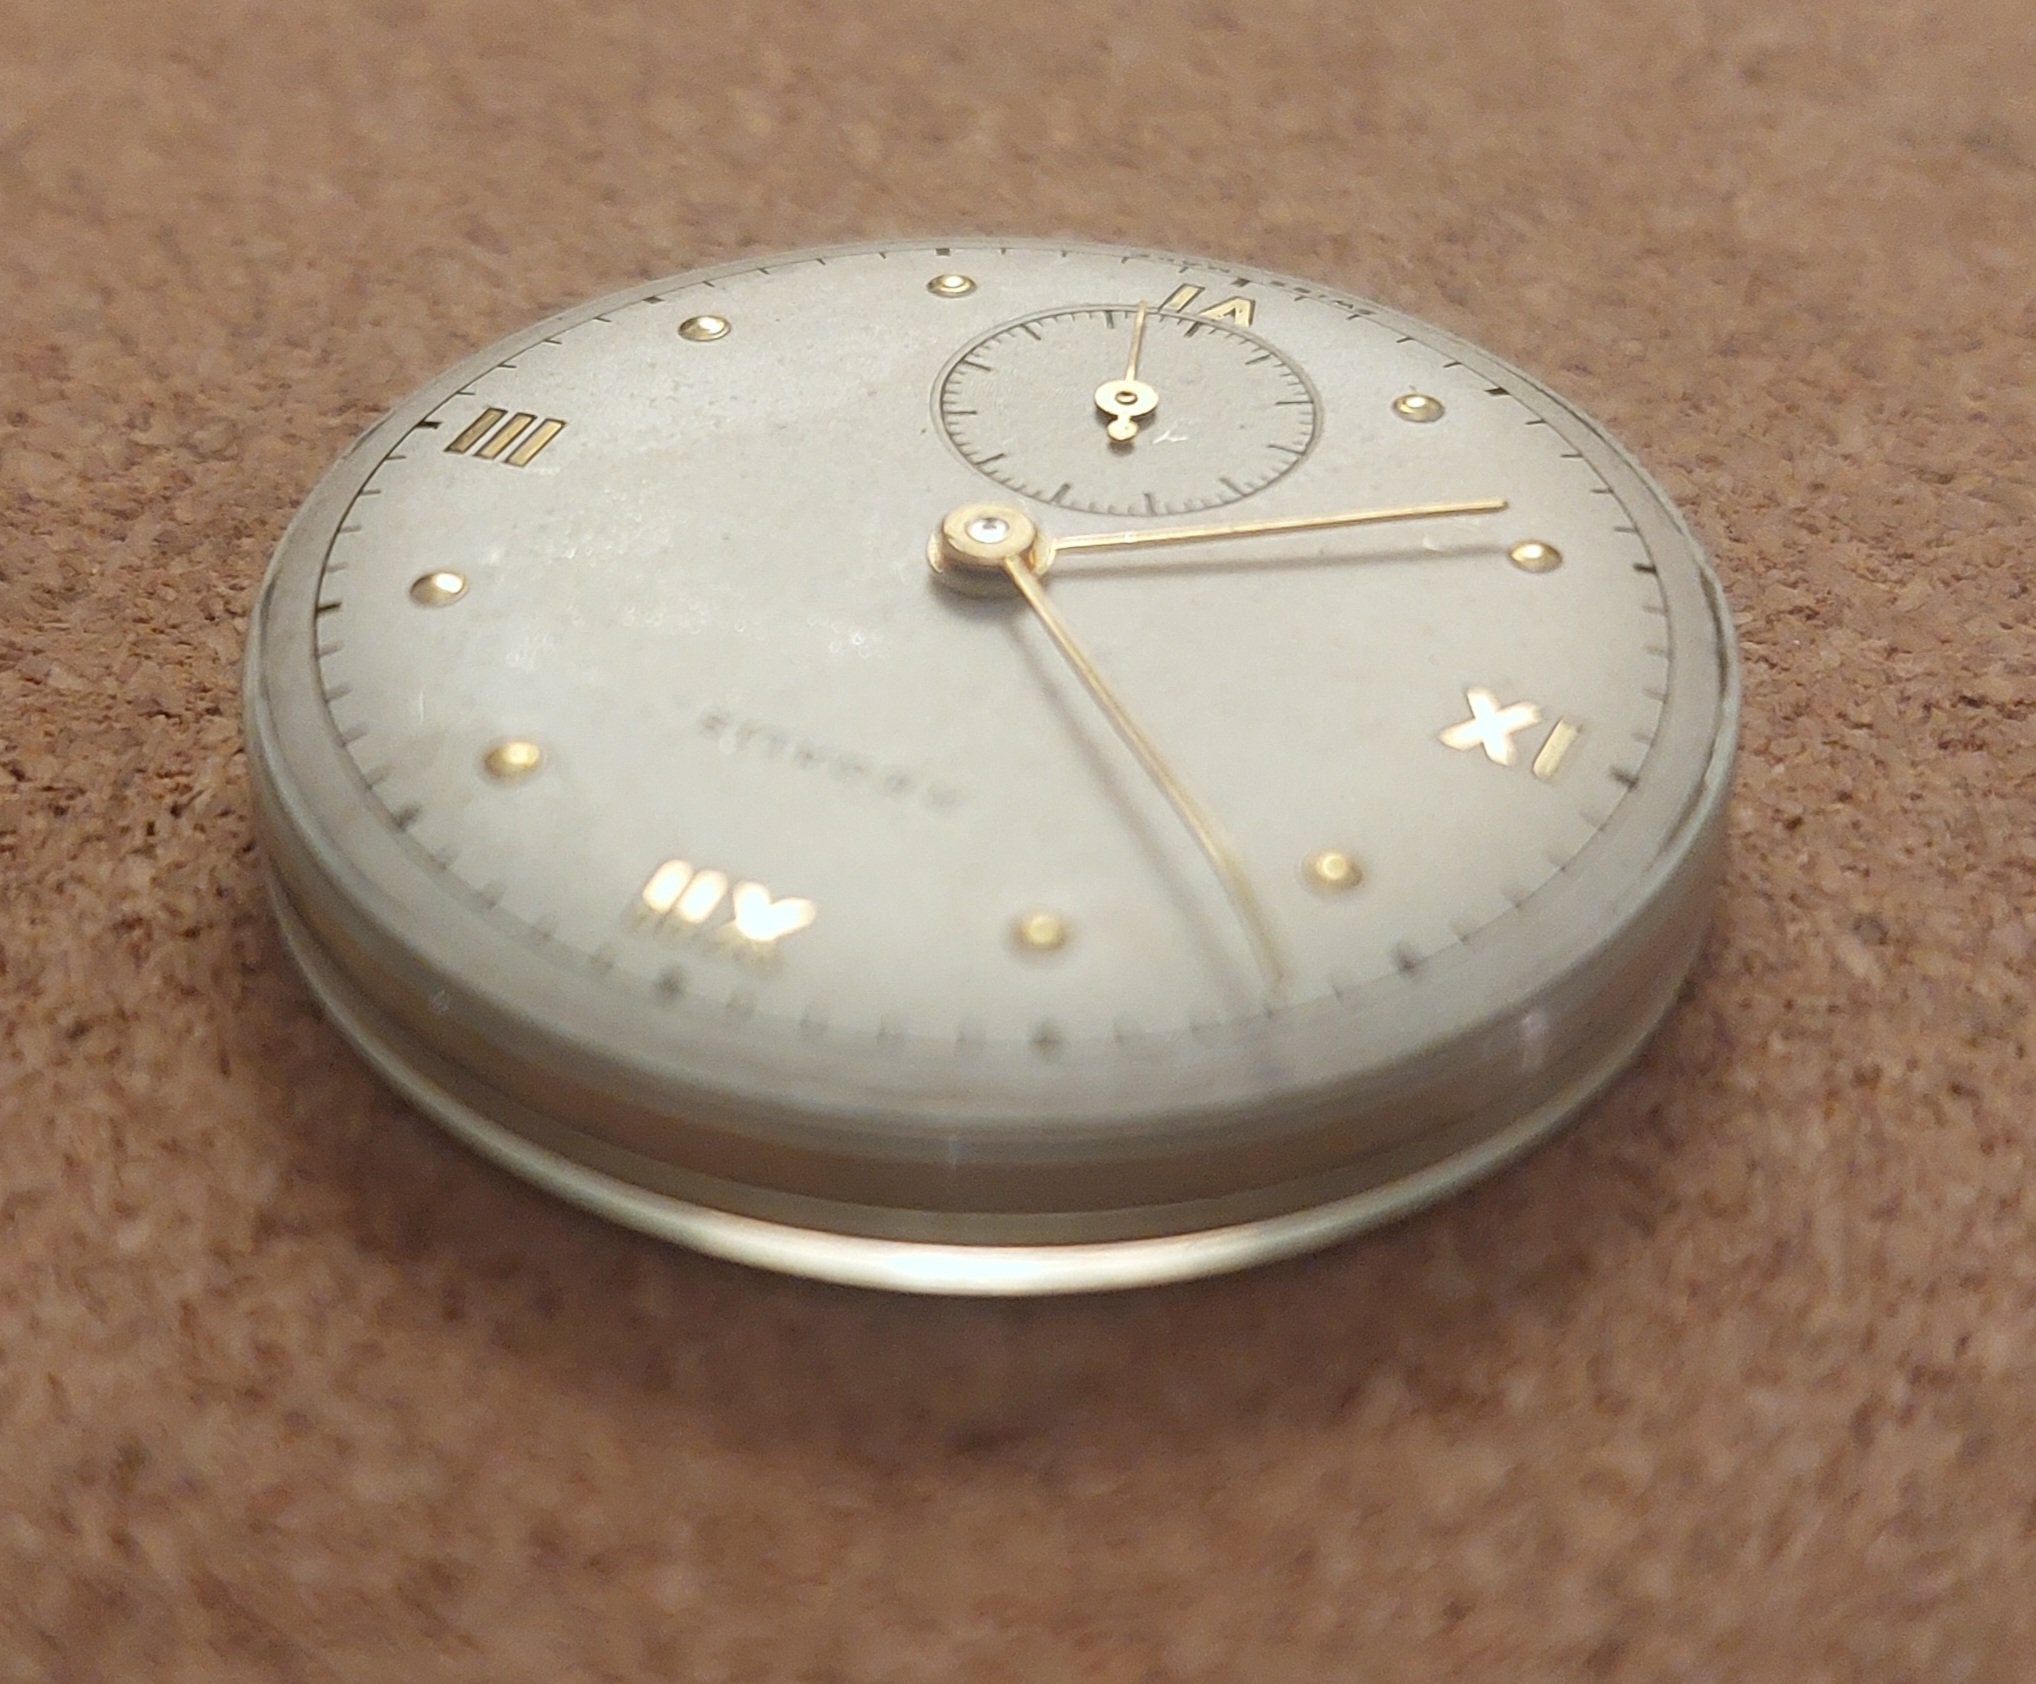 Regalis watch with acrylic inner dust cover | WatchUSeek Watch Forums